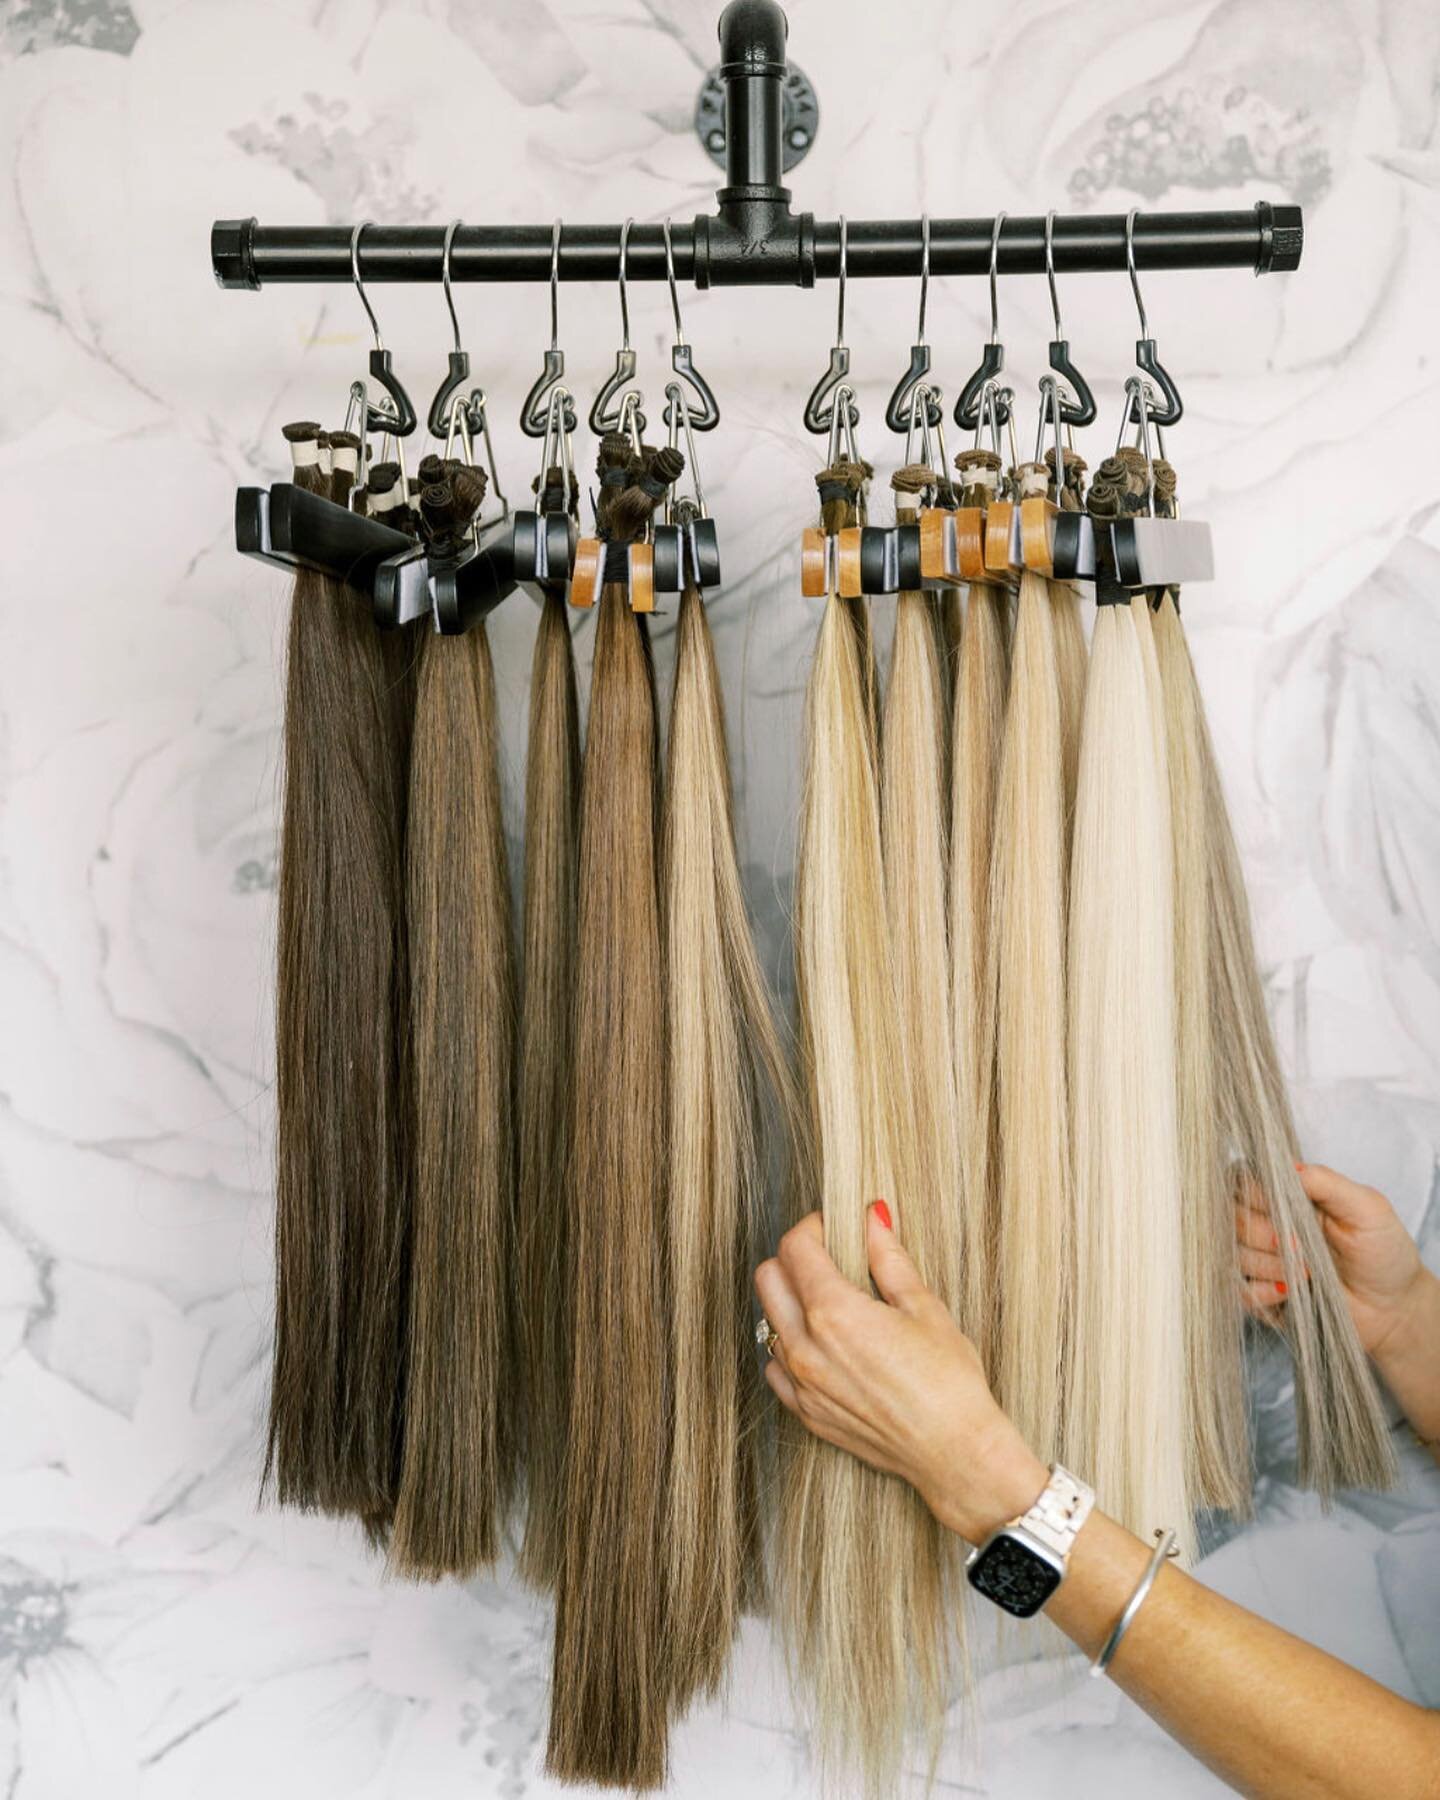 Hair Stock🔅

How much hair should you keep in stock?

I like to have a variety of levels of brunettes and blondes. I have mentioned before I like to keep most solids so I can customize them to what is needed.

If you are a new stylists just getting 